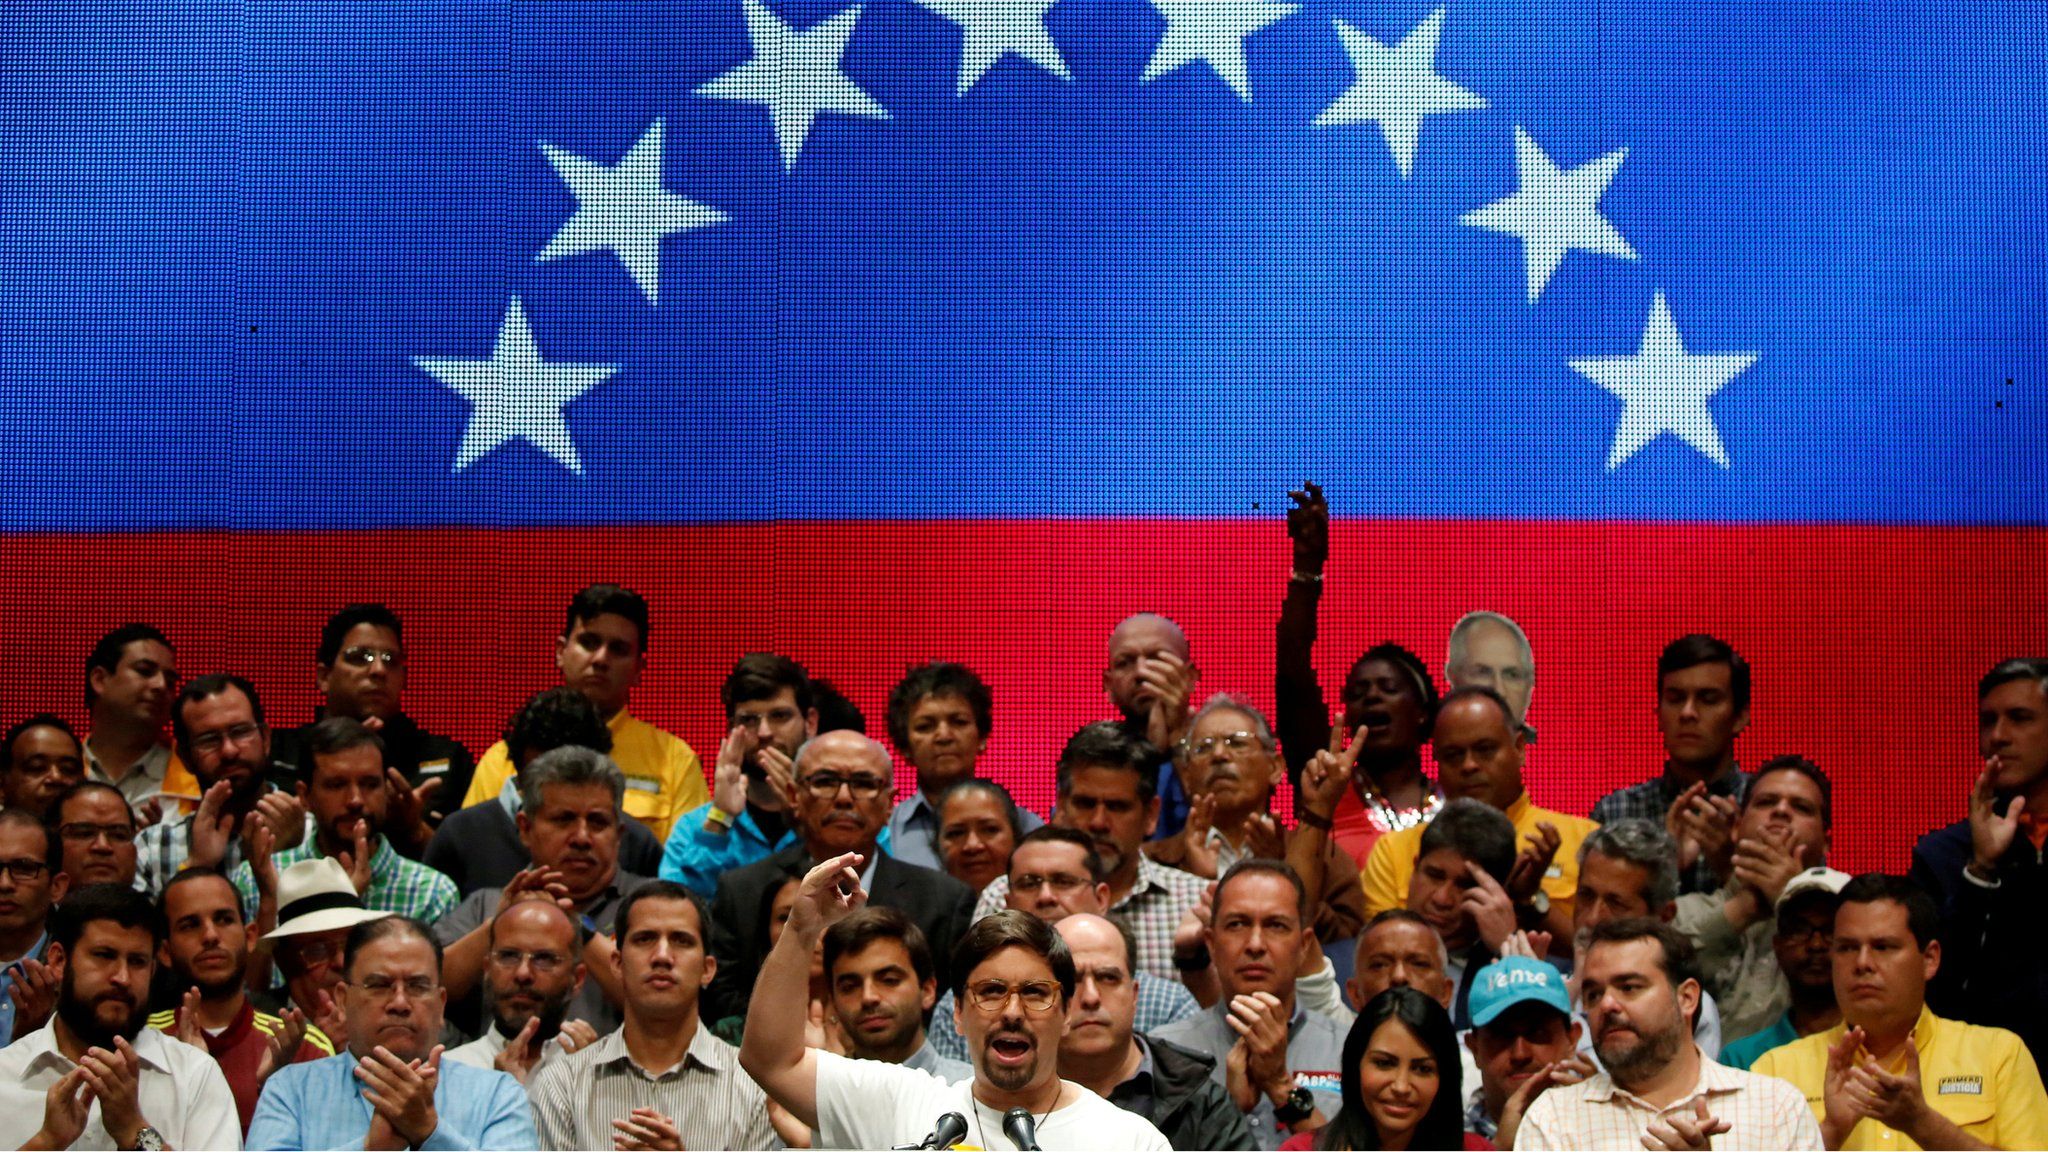 Opposition leader Freddy Guevara addresses a rally in Caracas. 17 July 2017